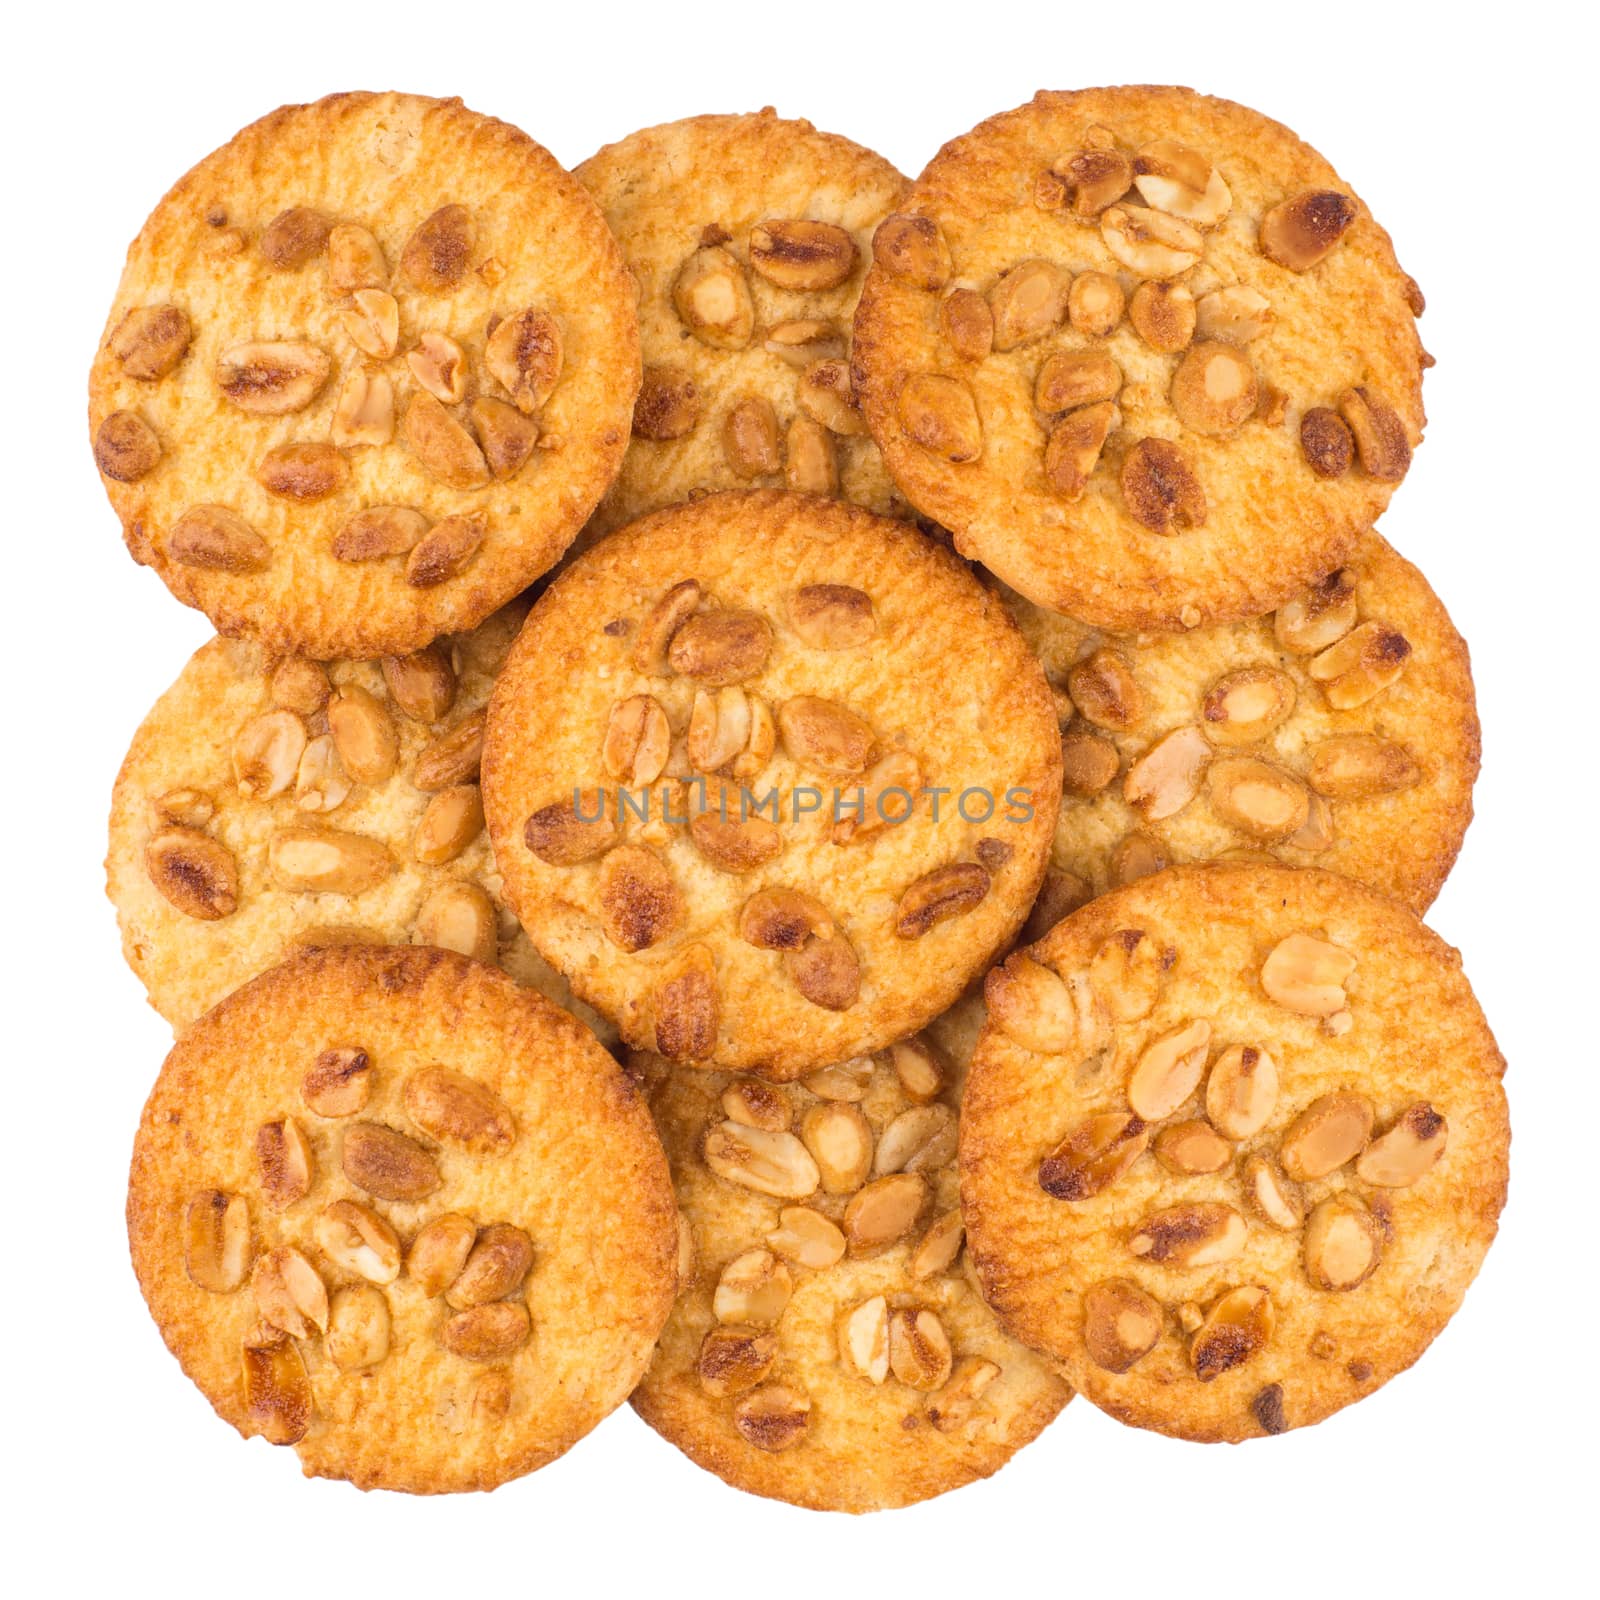 nut cookies on white background. by DGolbay